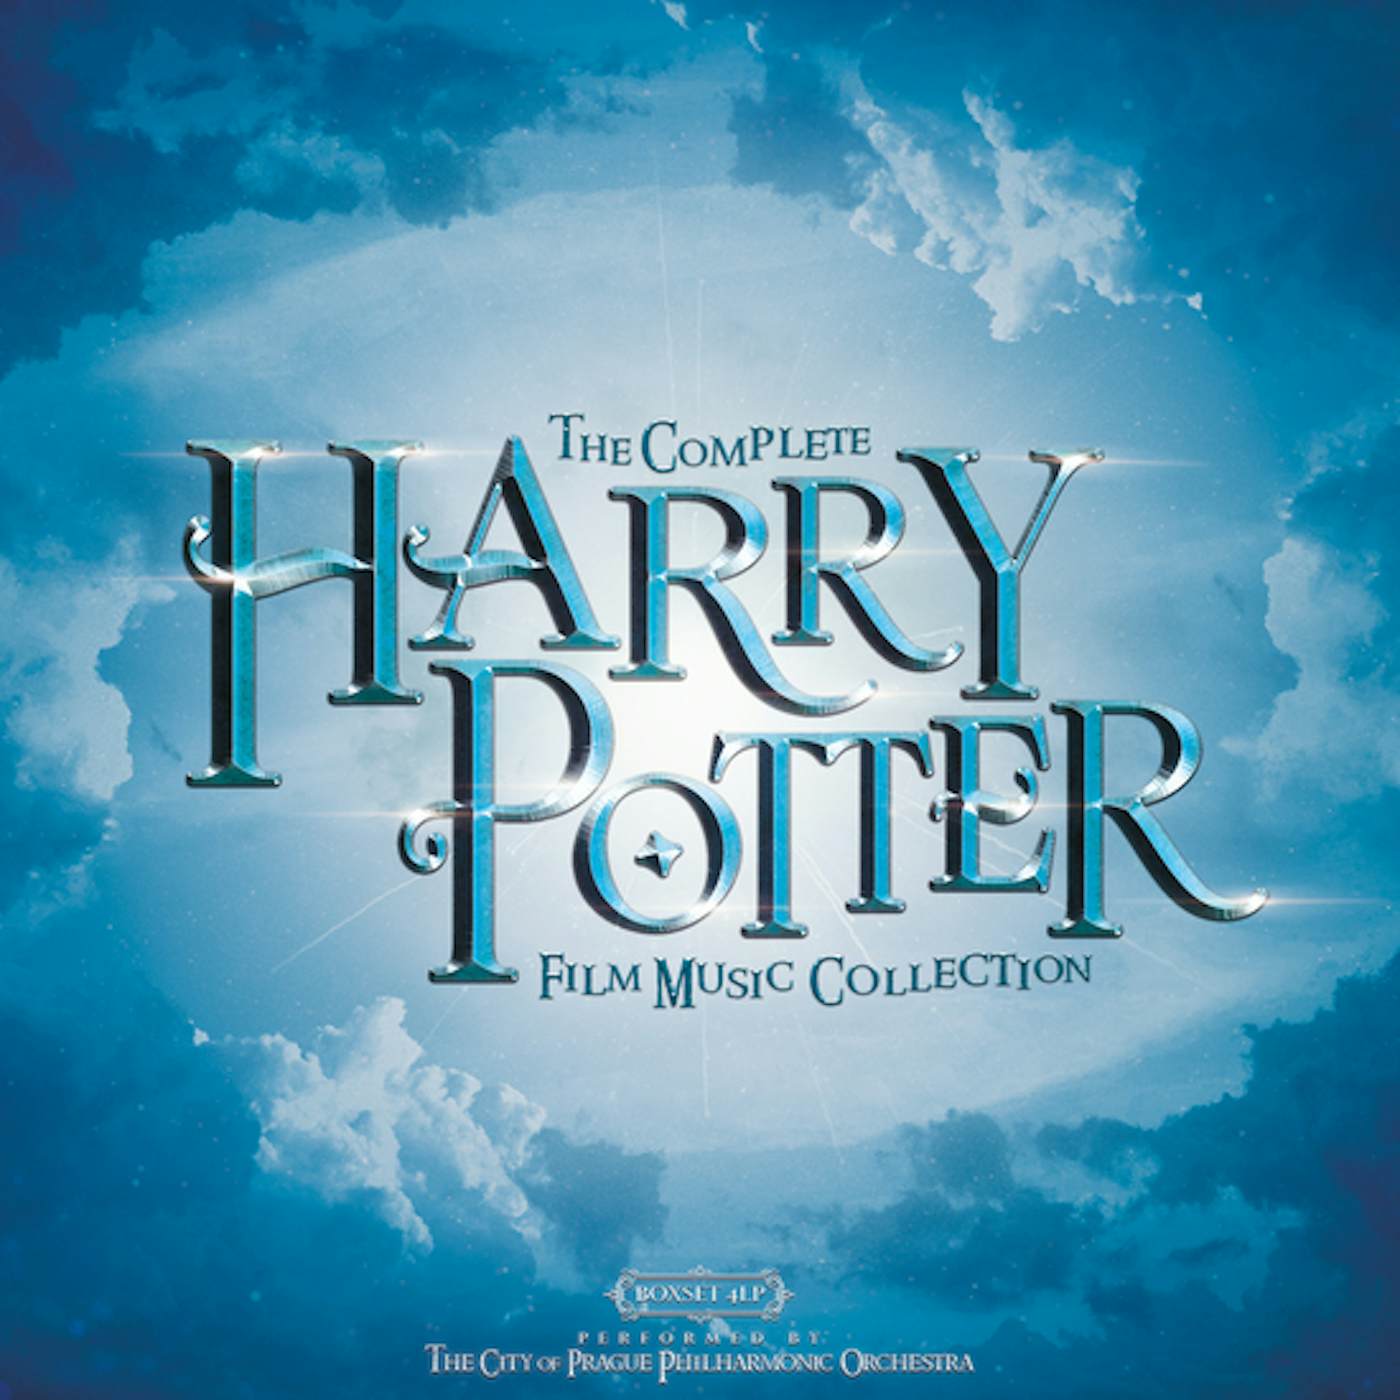 The City of Prague Philharmonic Orchestra The Complete Harry Potter Film Music Collection (4LP/Box set) Vinyl Record